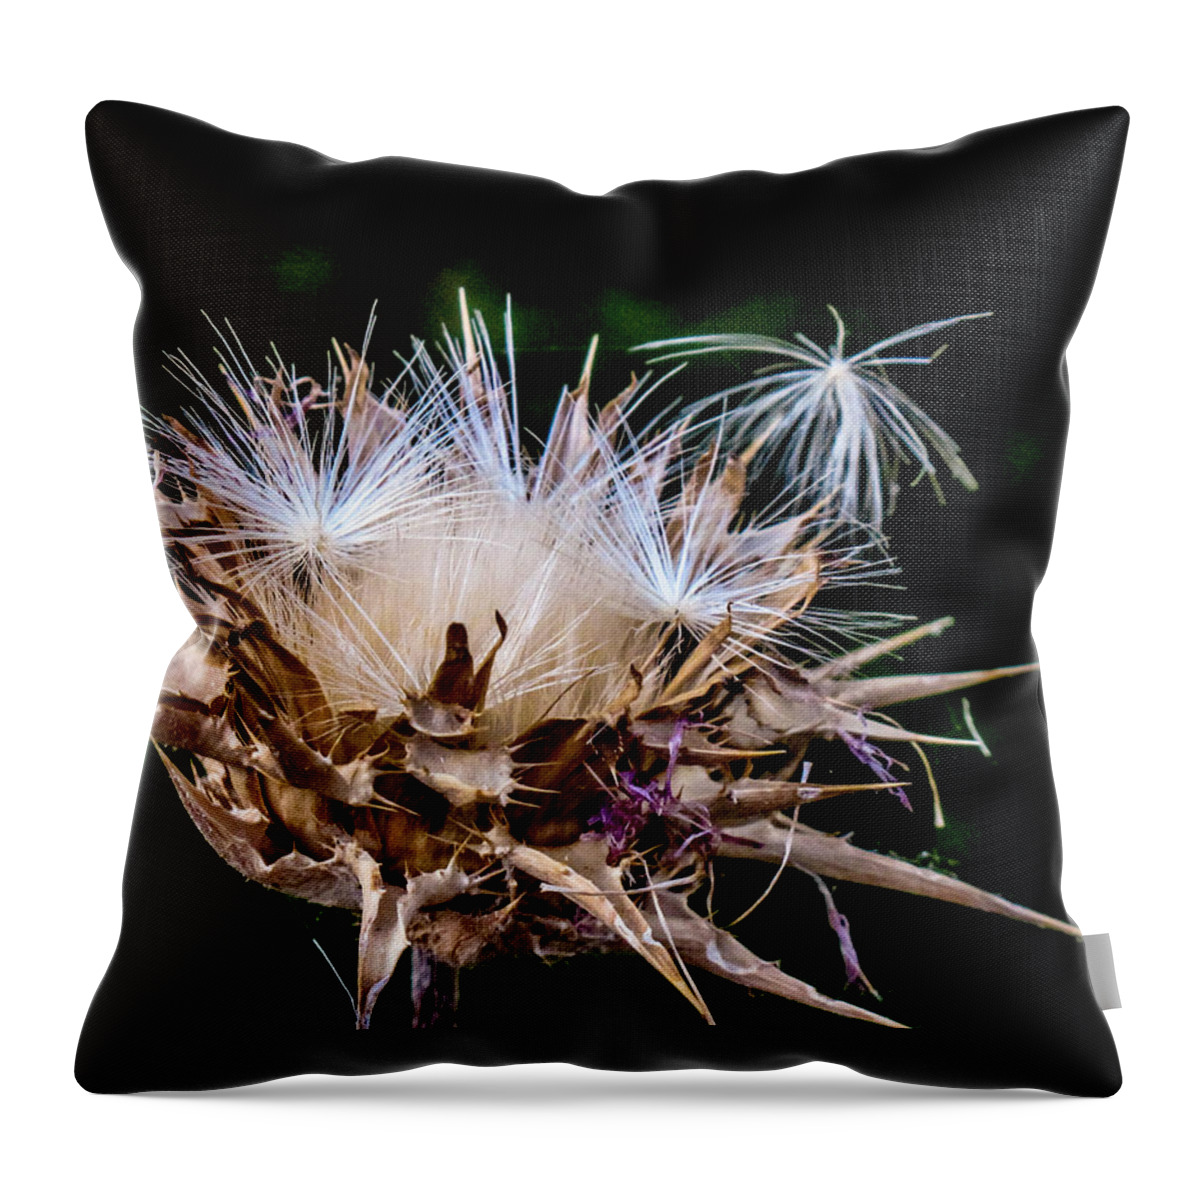 Flowers Throw Pillow featuring the photograph Leaving the Nest by Susan Eileen Evans